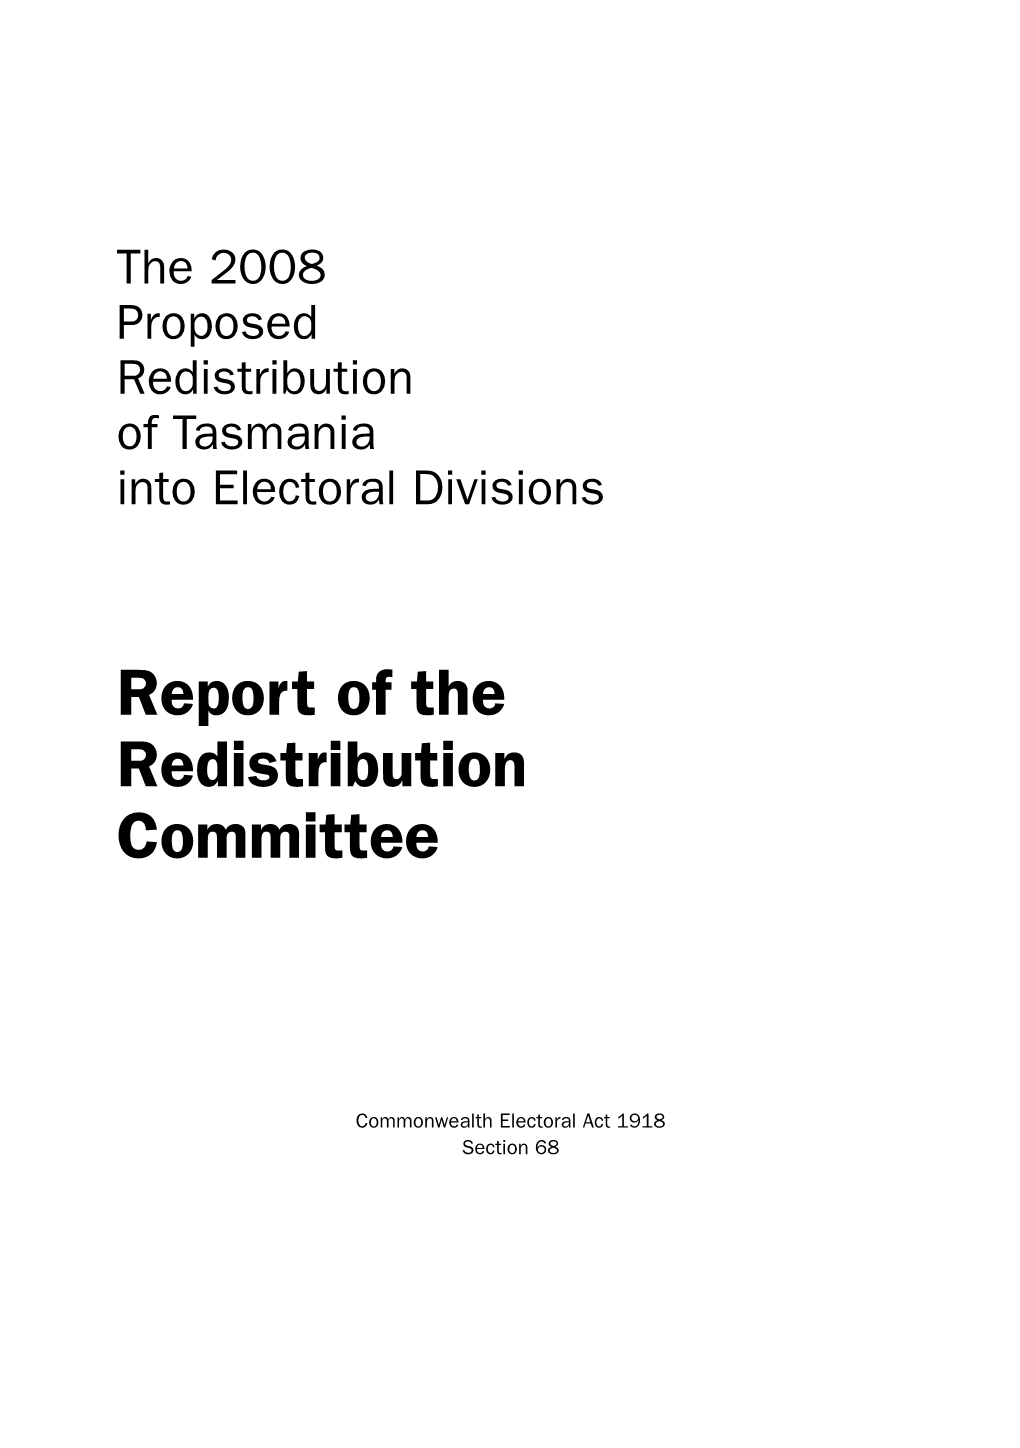 Report of the Redistribution Committee